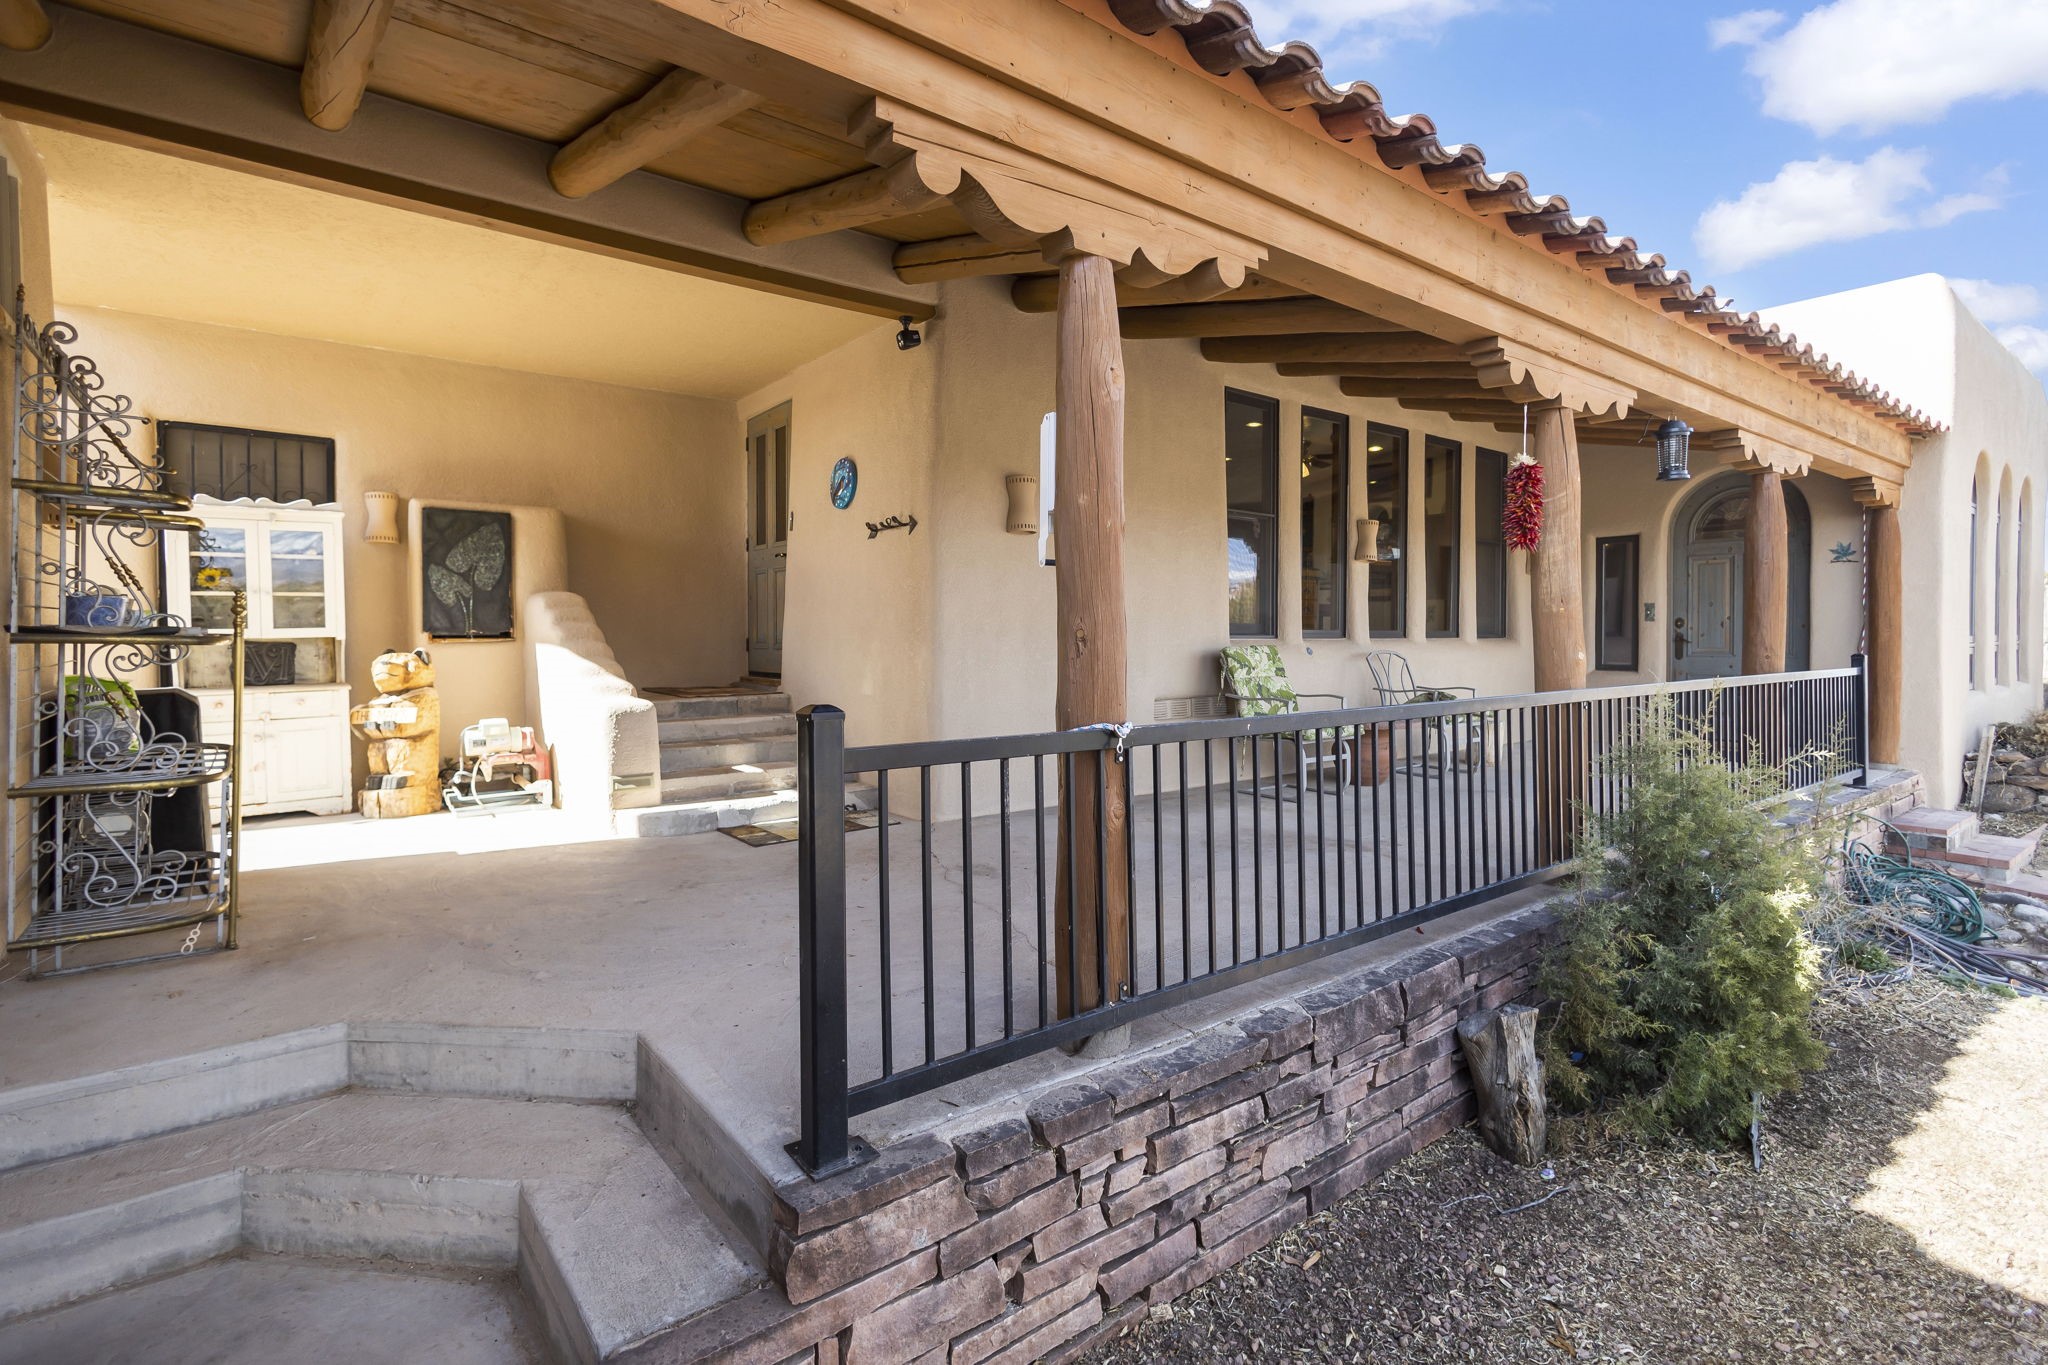 189 Thankhohay Poe, Santa Fe, New Mexico 87506, 2 Bedrooms Bedrooms, ,3 BathroomsBathrooms,Residential,For Sale,189 Thankhohay Poe,202335227